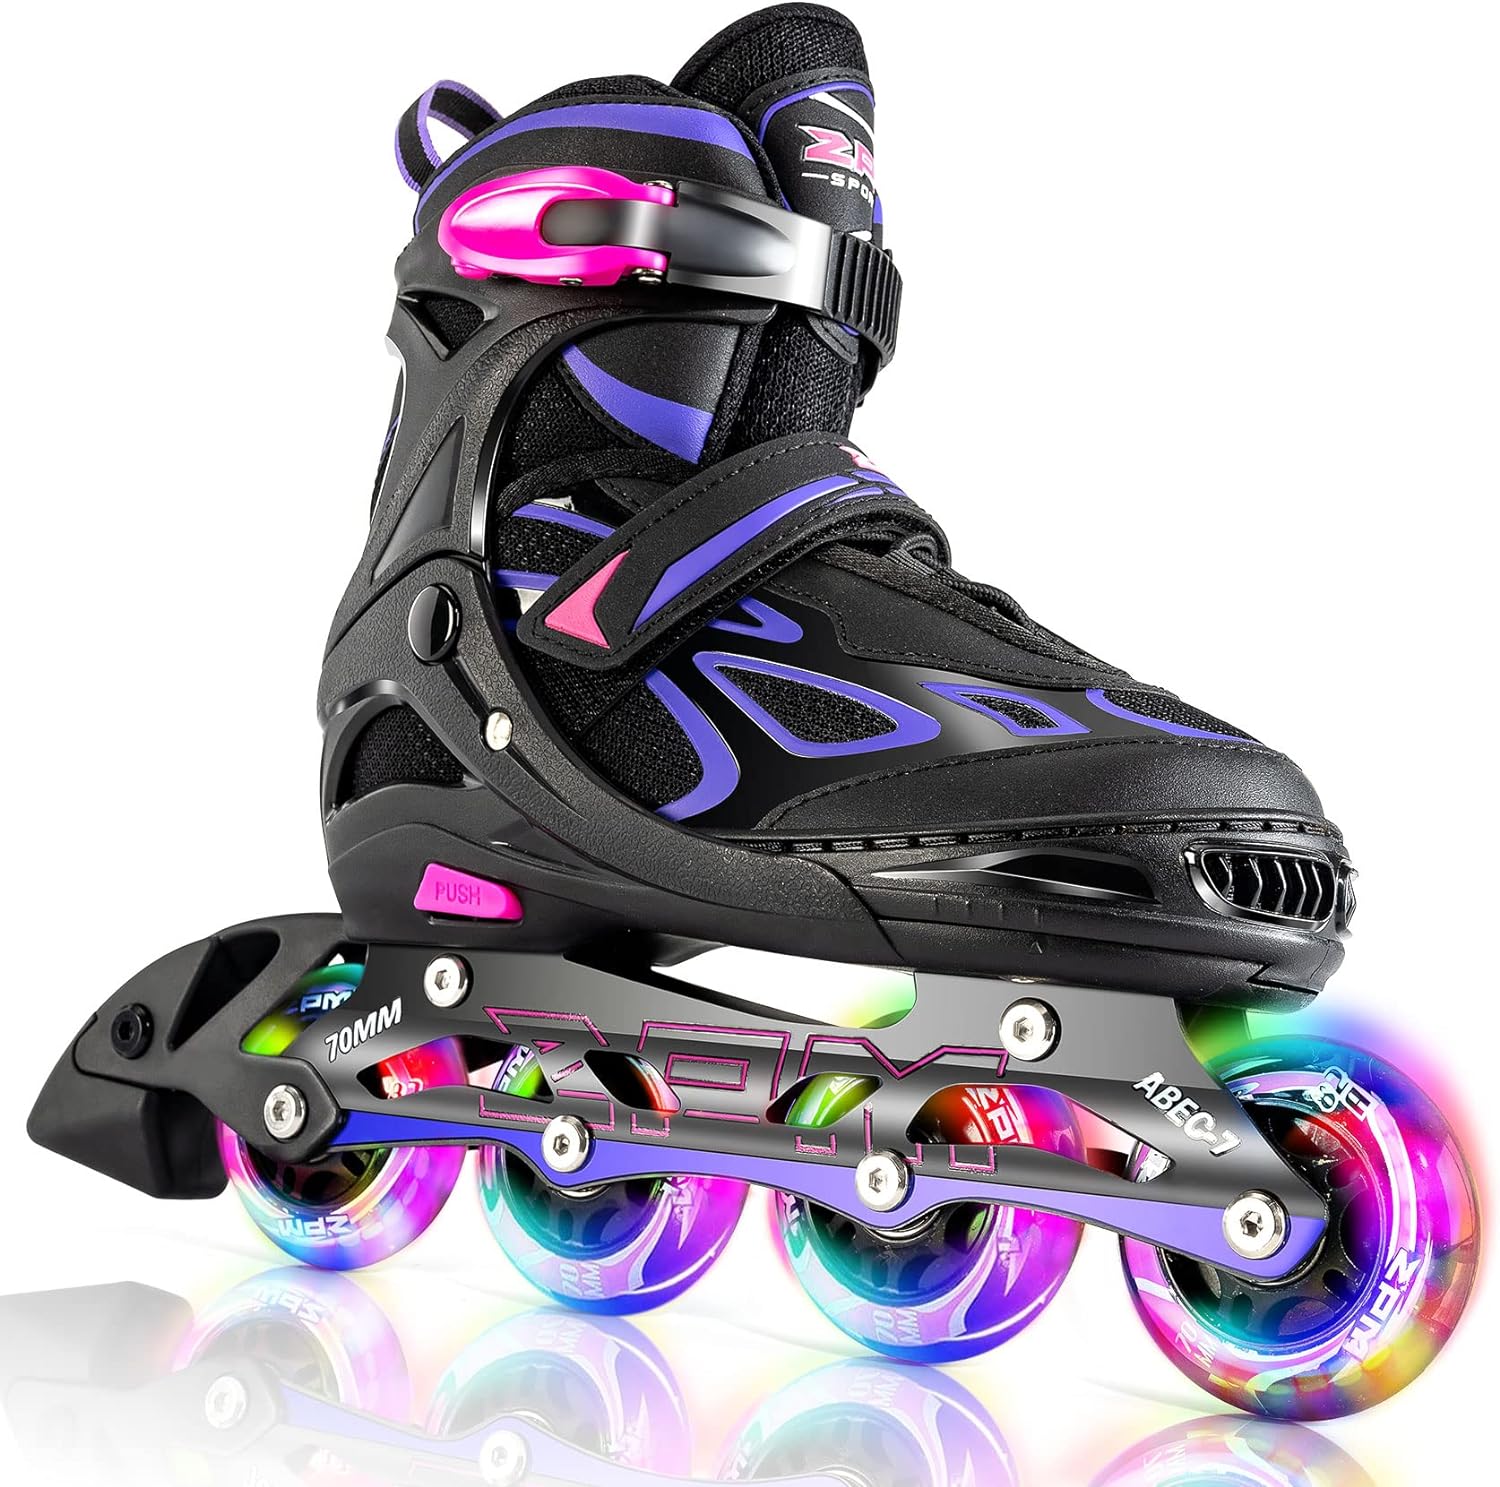 These are great quality and feel great on your feet. The wheels are also very cool, not like most light up wheels.10/10 recommend